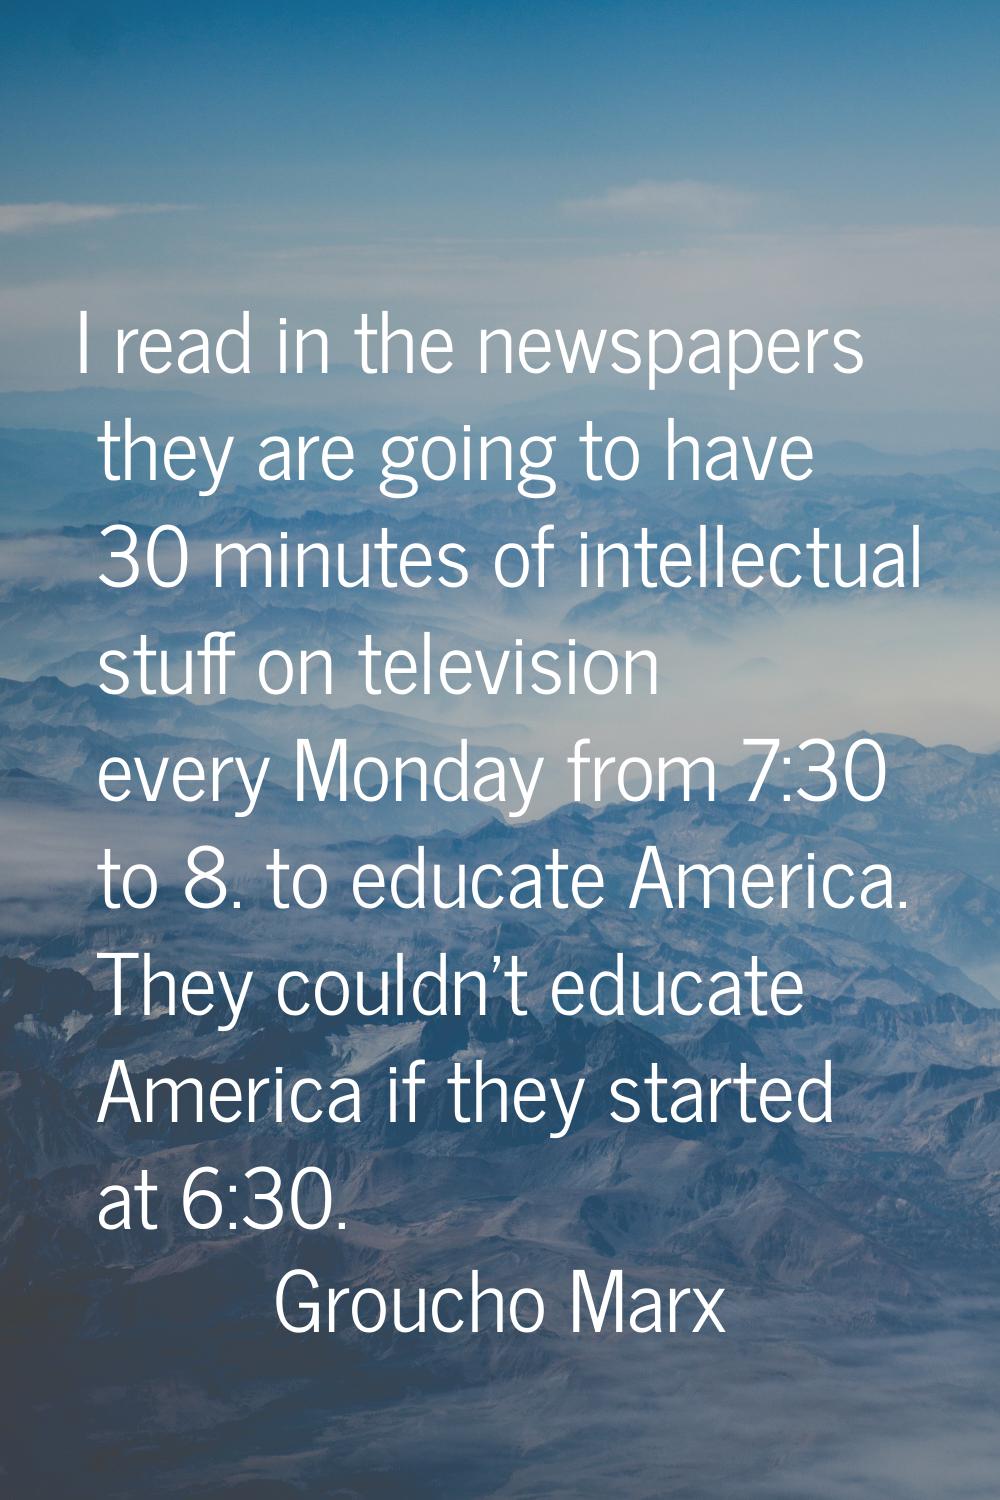 I read in the newspapers they are going to have 30 minutes of intellectual stuff on television ever